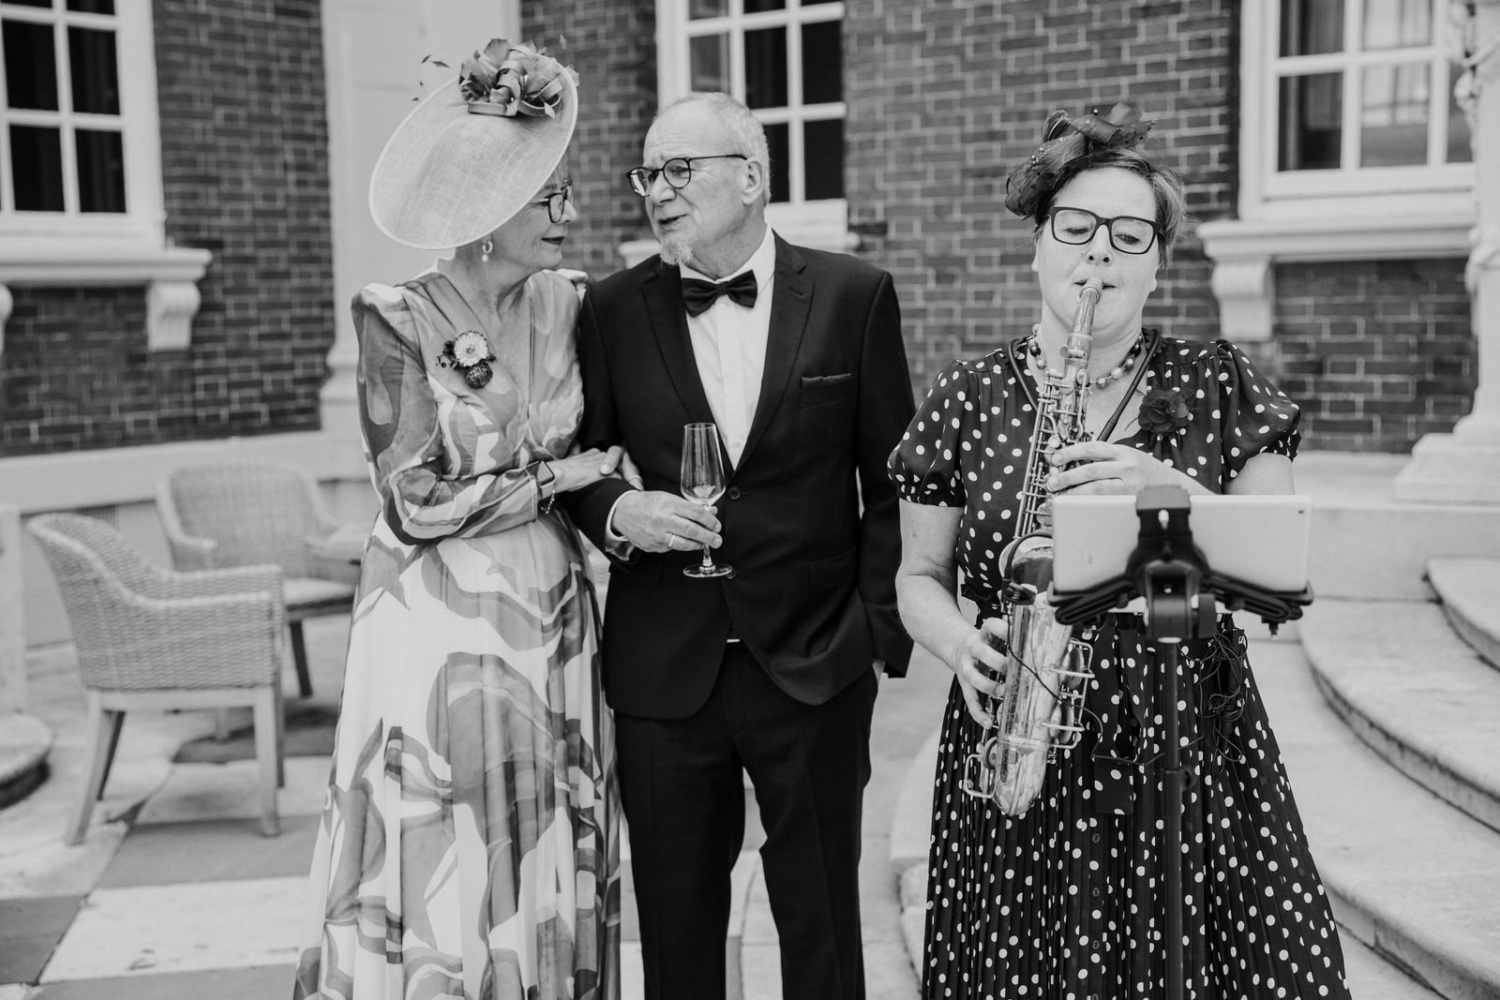 A black and white photo of a woman in a dress and a man with a saxophone.